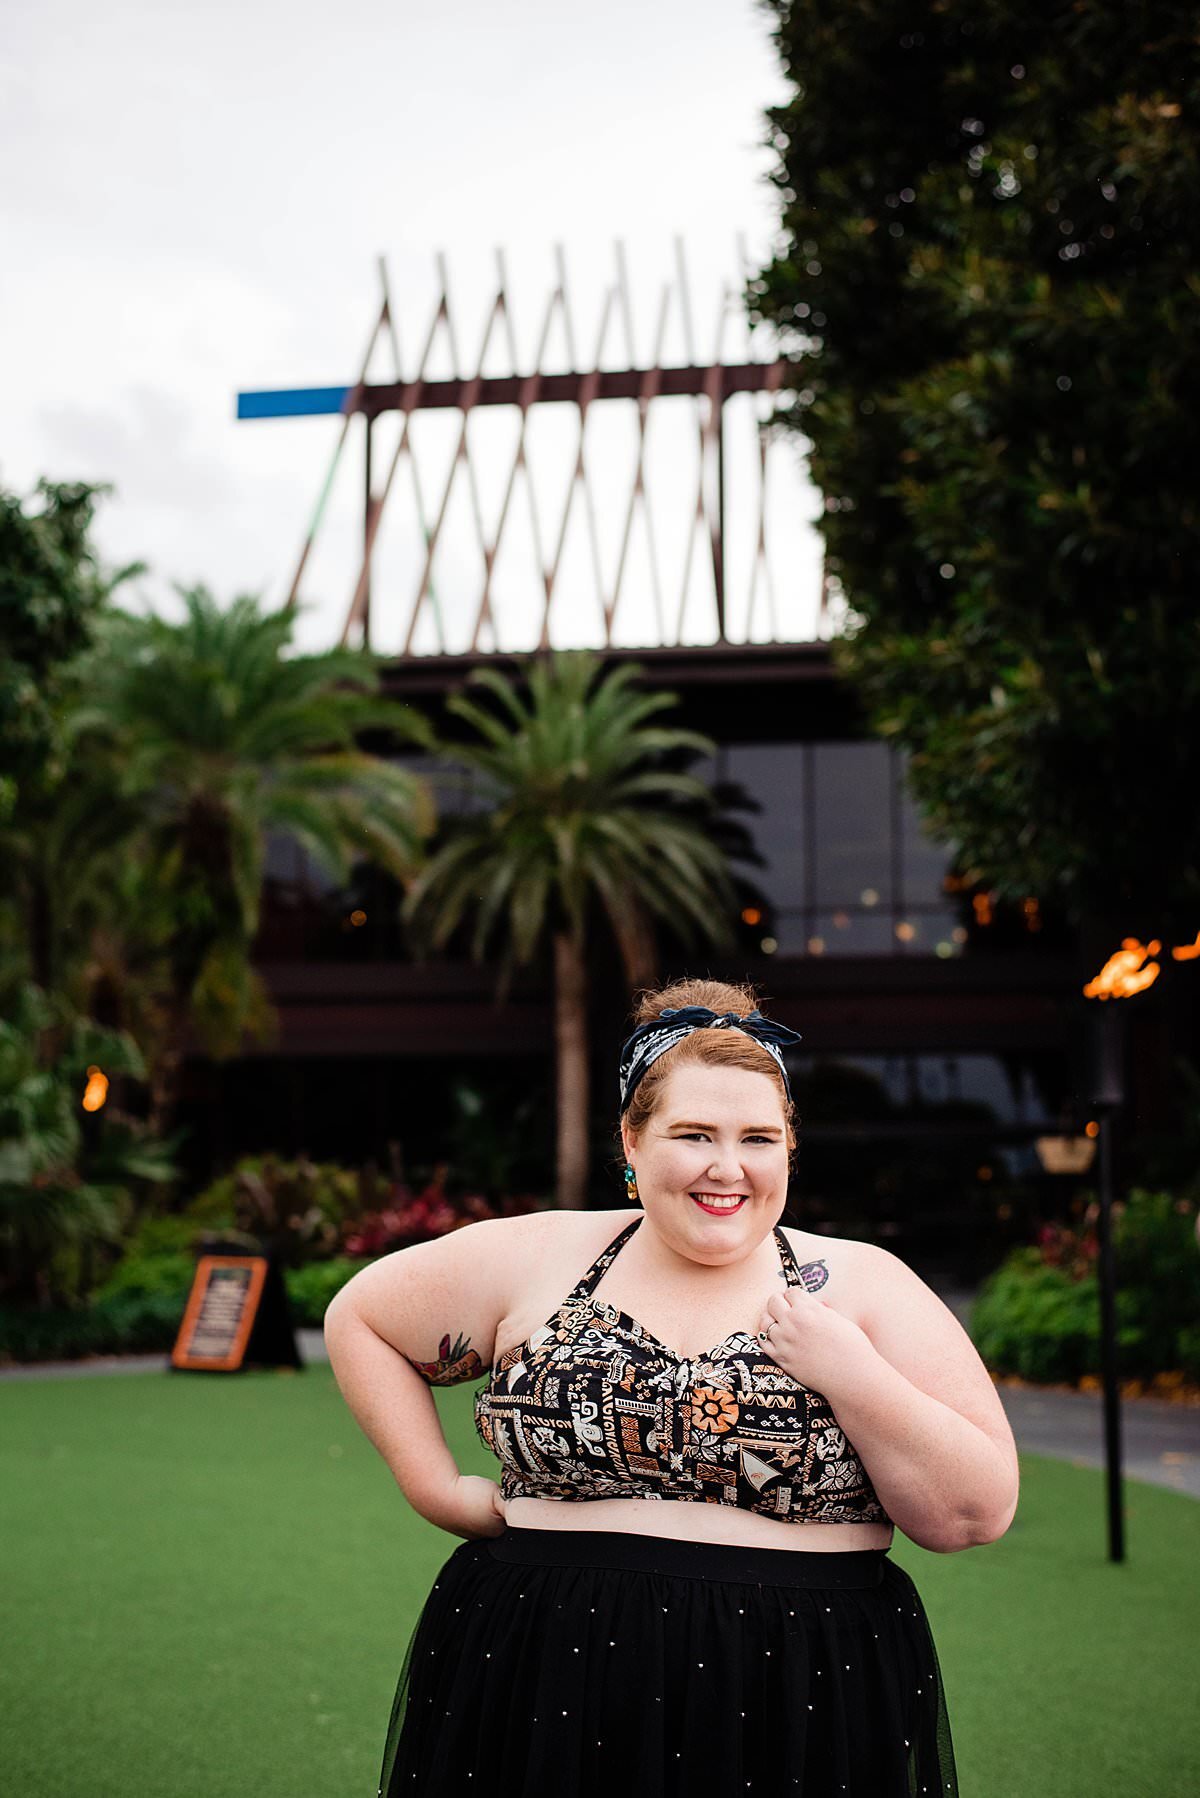 Disney social influencer, the Girl with the Dolewhip Tattoo wearing a black tule skirt and Disney inspired halter outside of the Polynesian Resort at Disney World